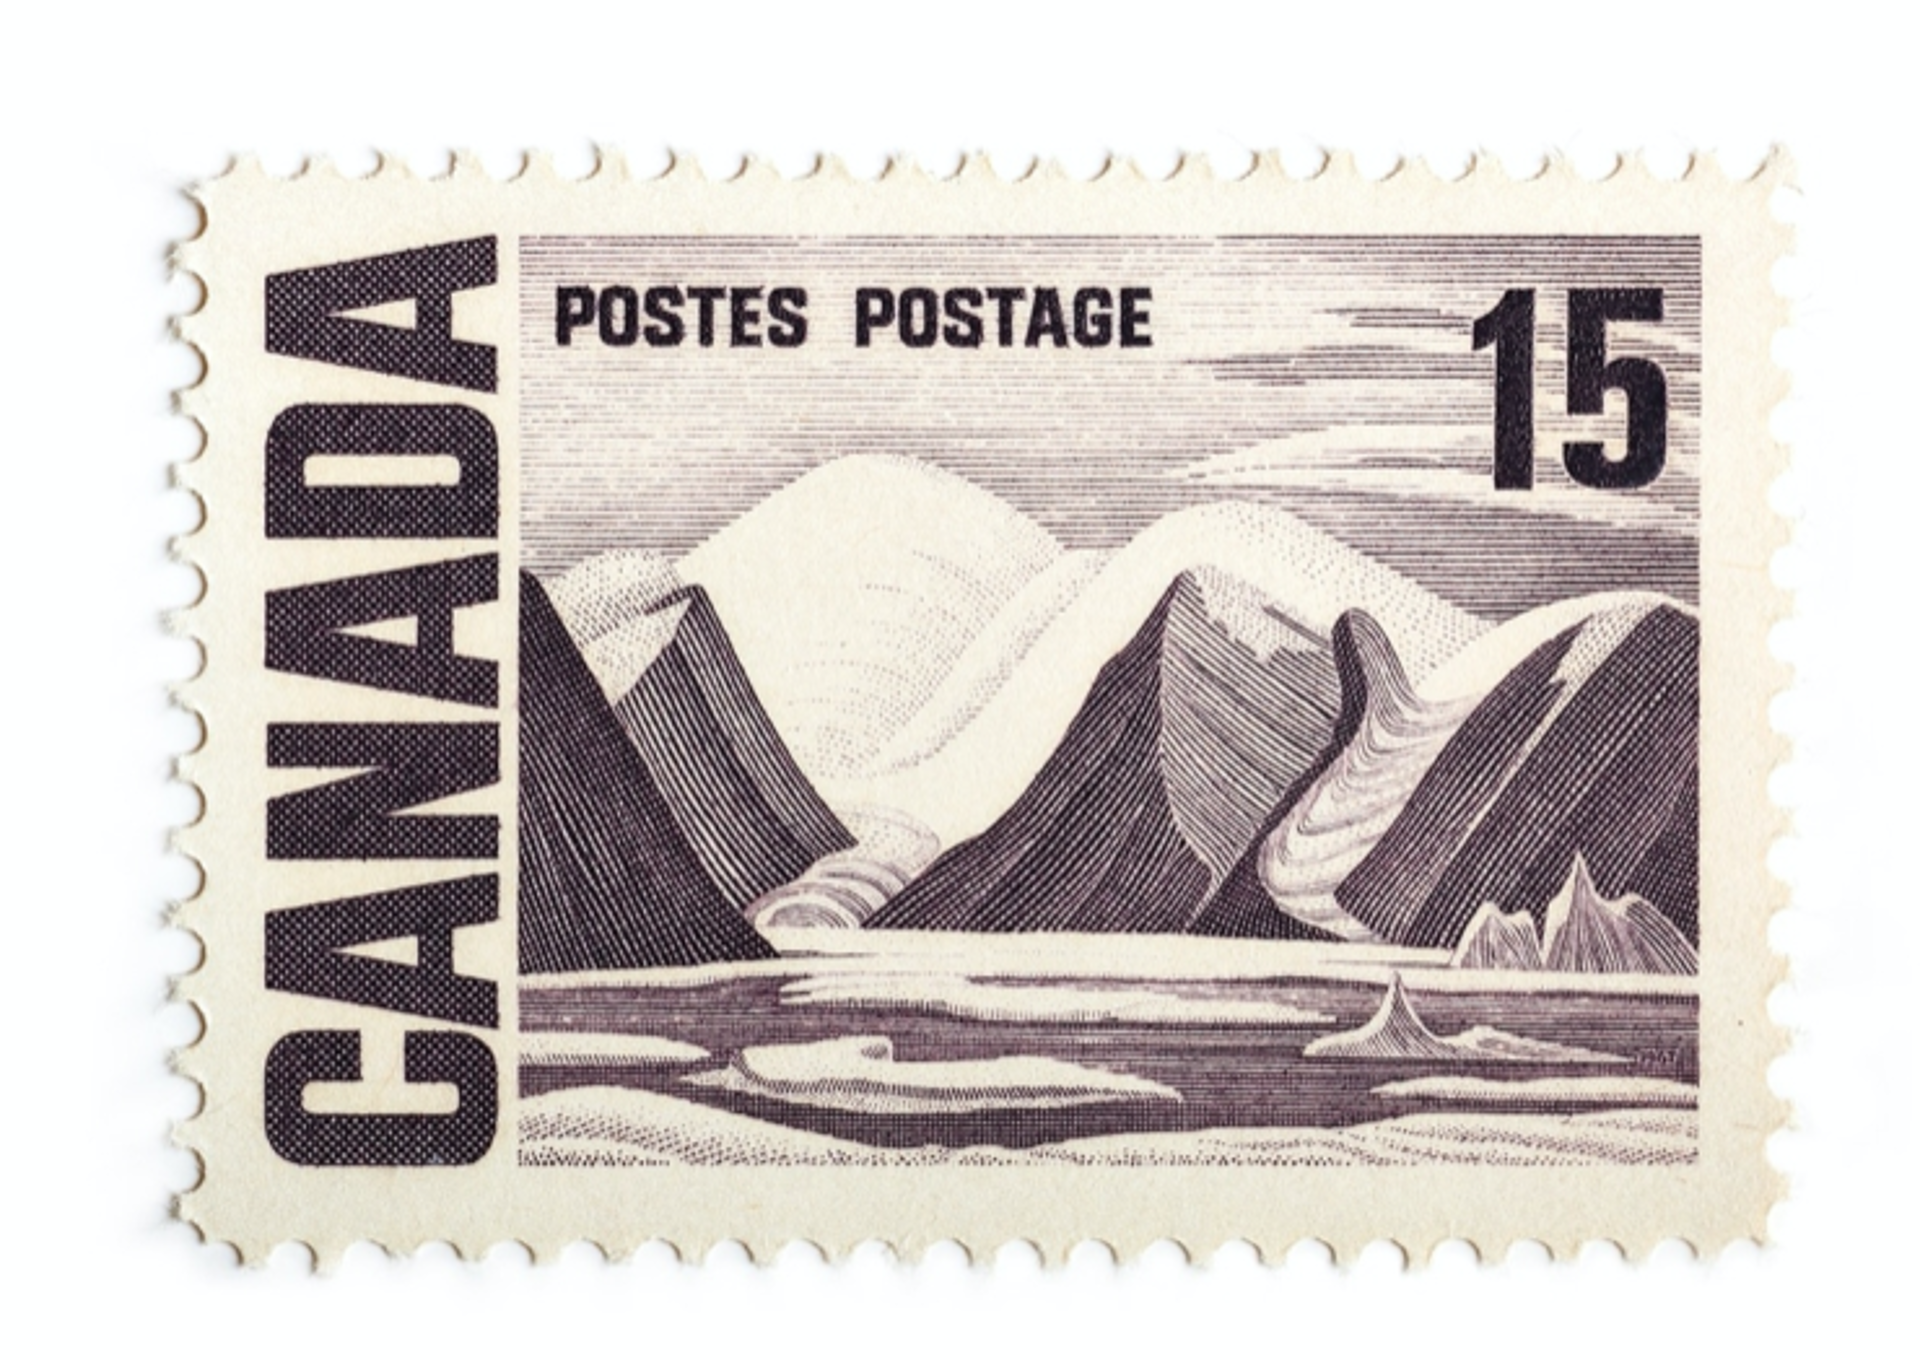 Canada Stamp 15 cents by Peter Andrew Lusztyk | Collectibles